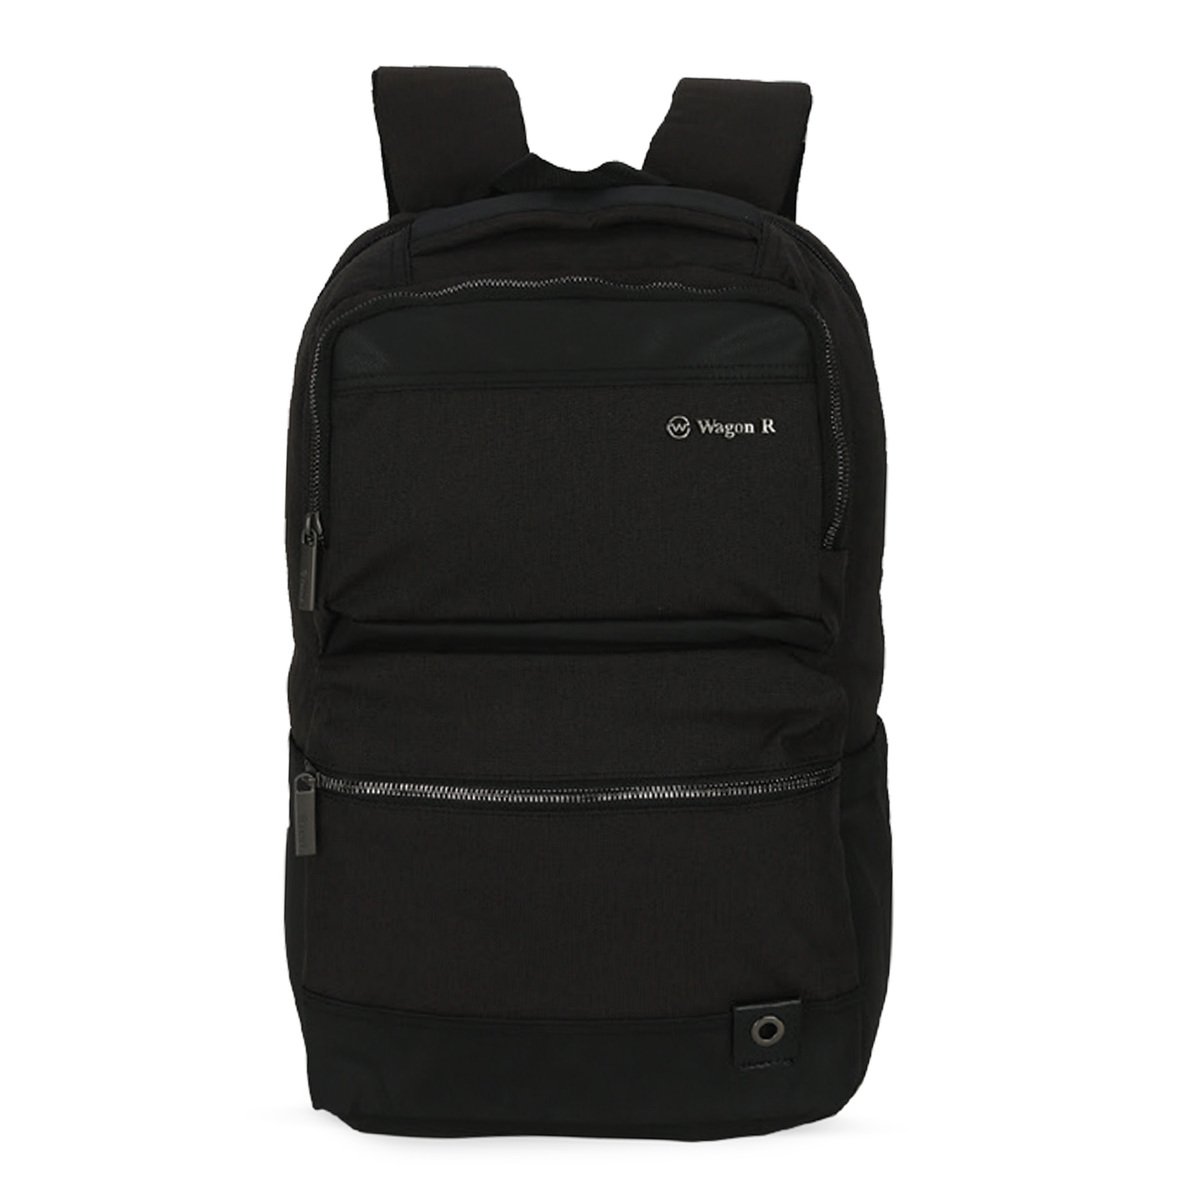 Wagon R Laptop Backpack TZ117-55 Assorted